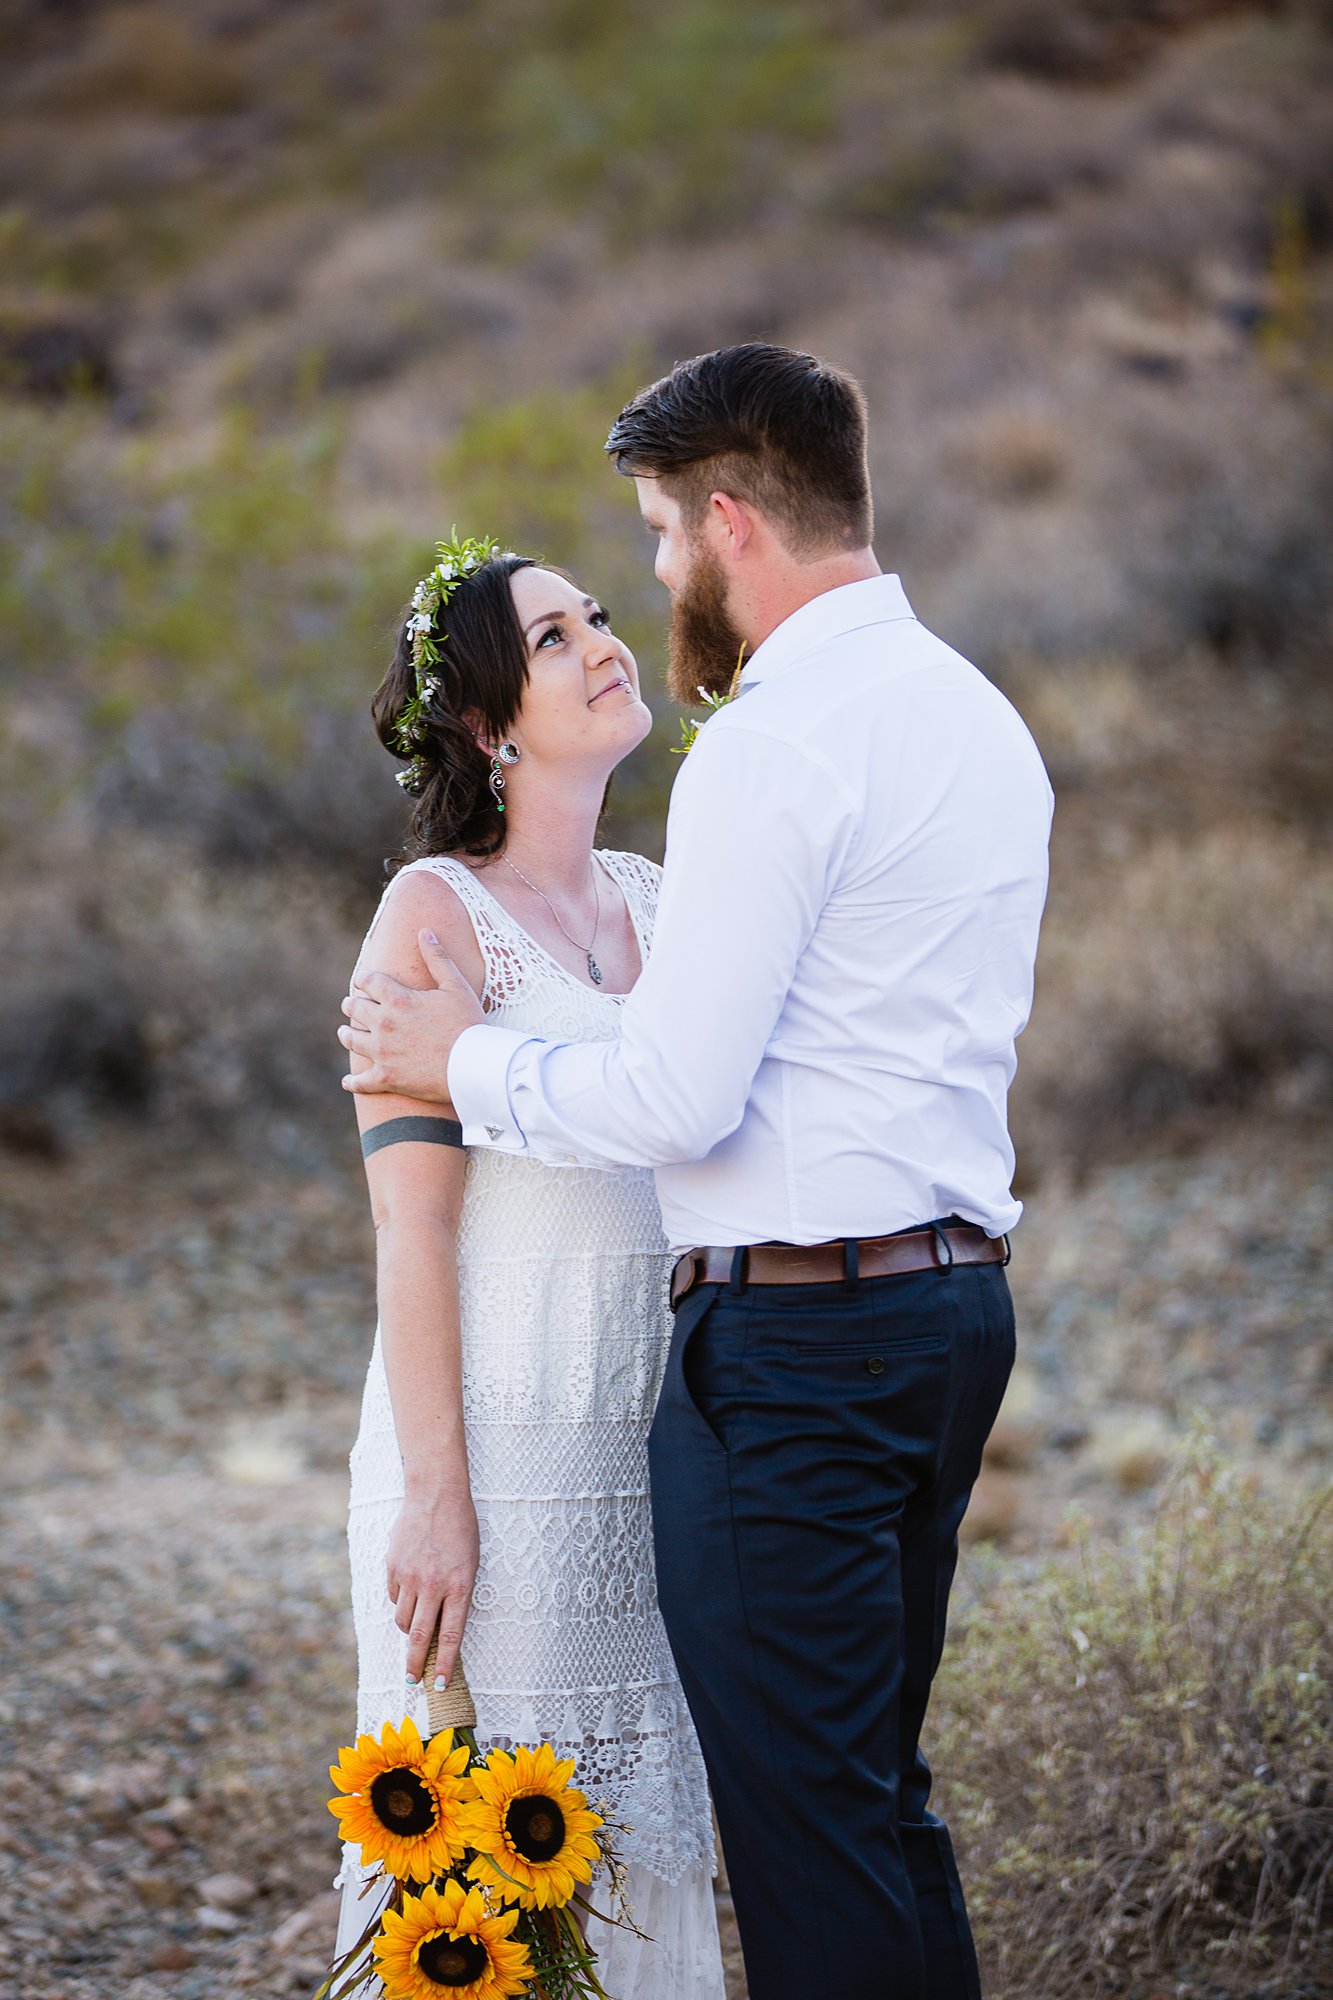 Boho bride and groom during their wedding first look in the Arizona desert by Phoenix wedding photographers PMA Photography.